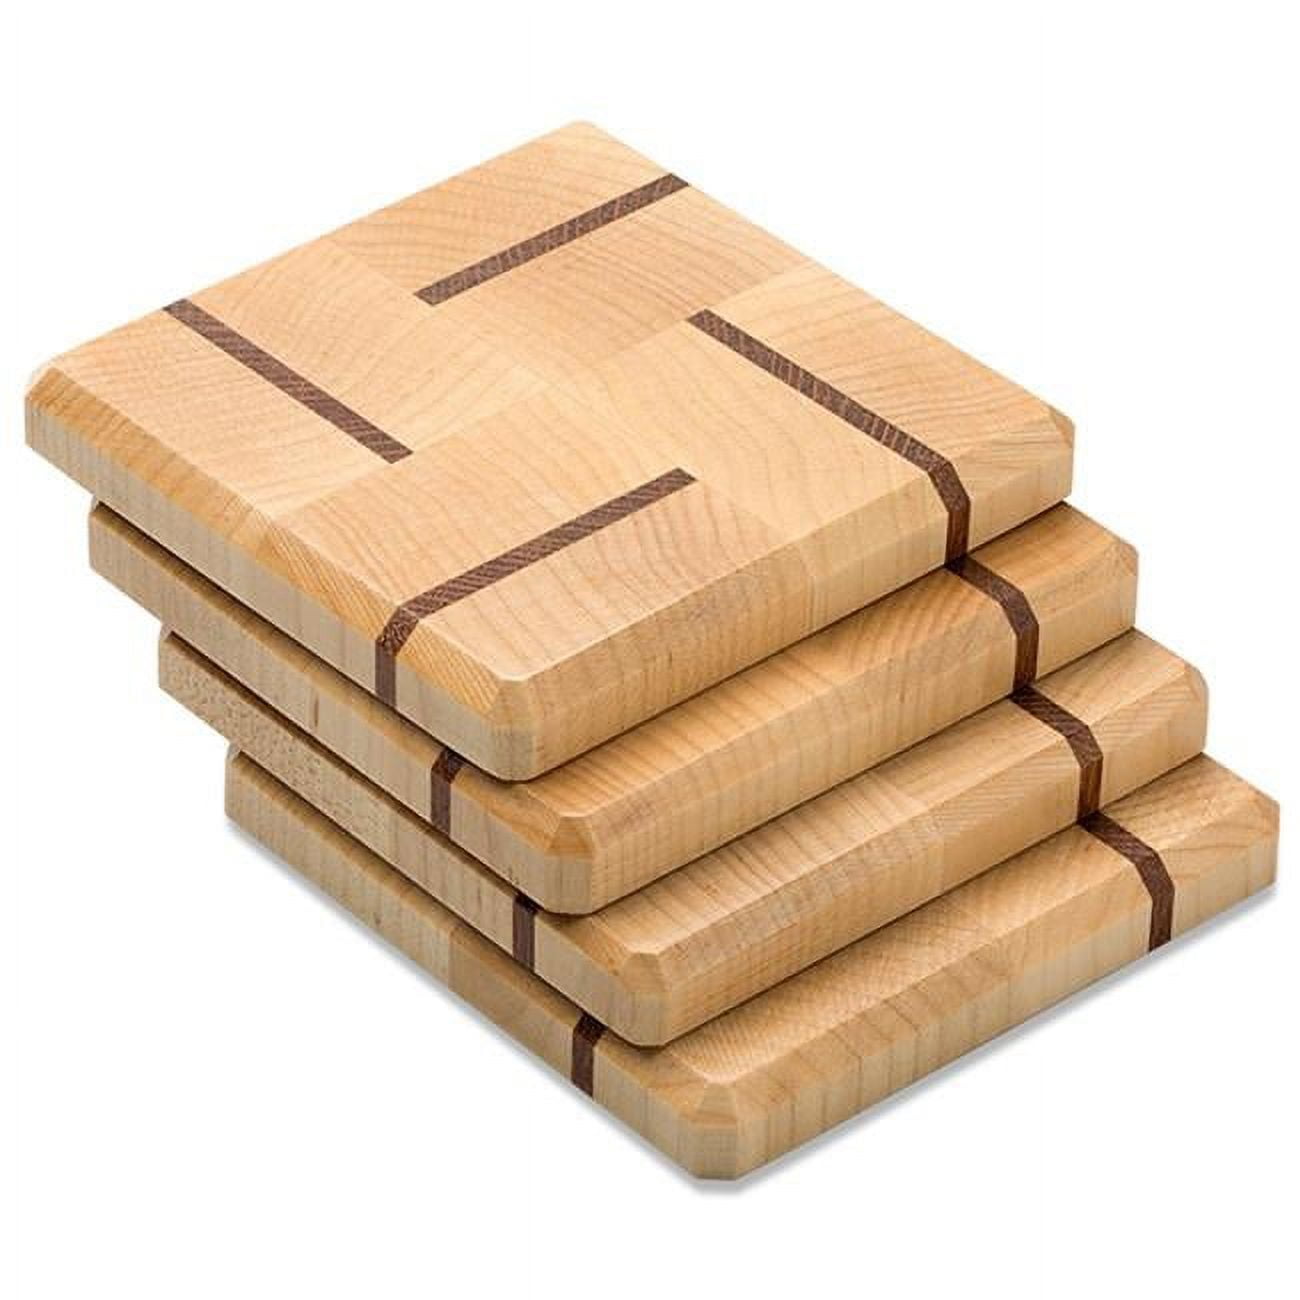 Tiger and Wenge Wood Coasters End Grain (Set of 4) A & E Millwork